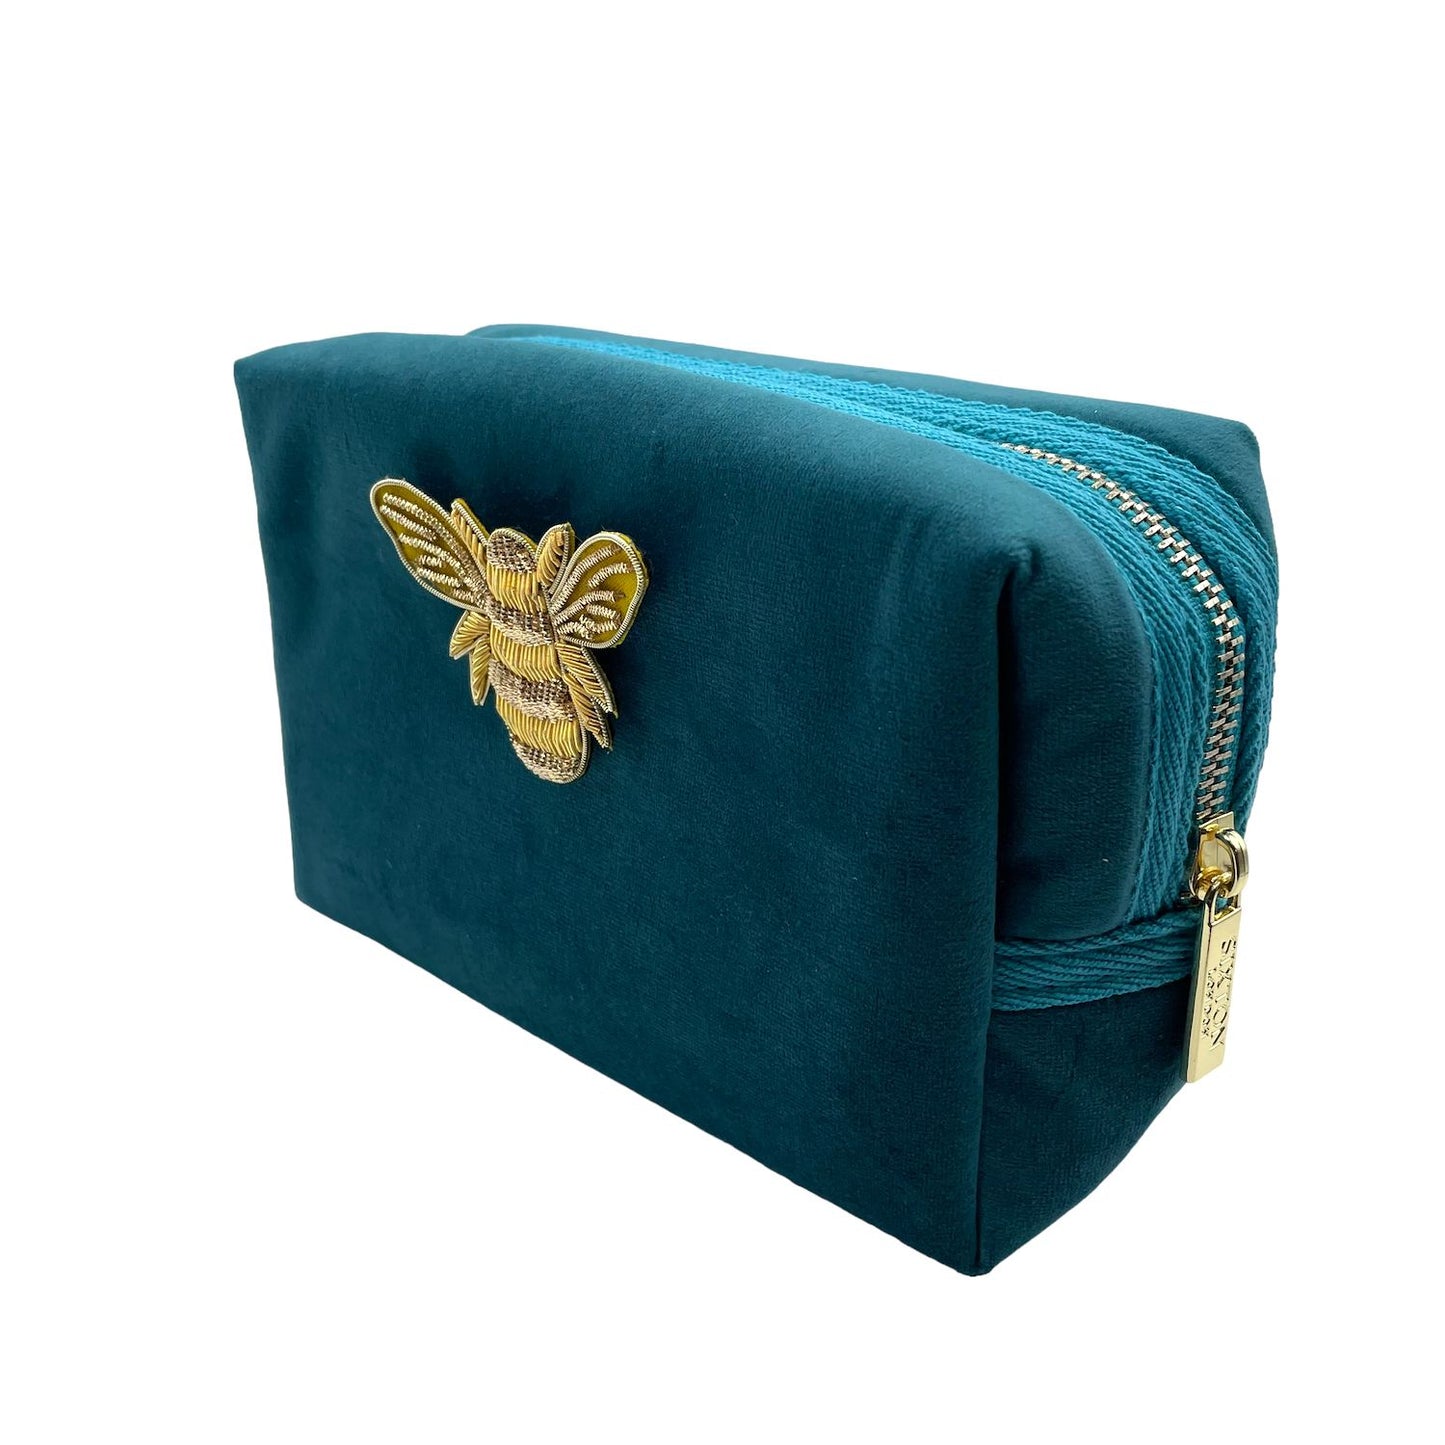 Teal make-up bag & gold bee pin - recycled velvet